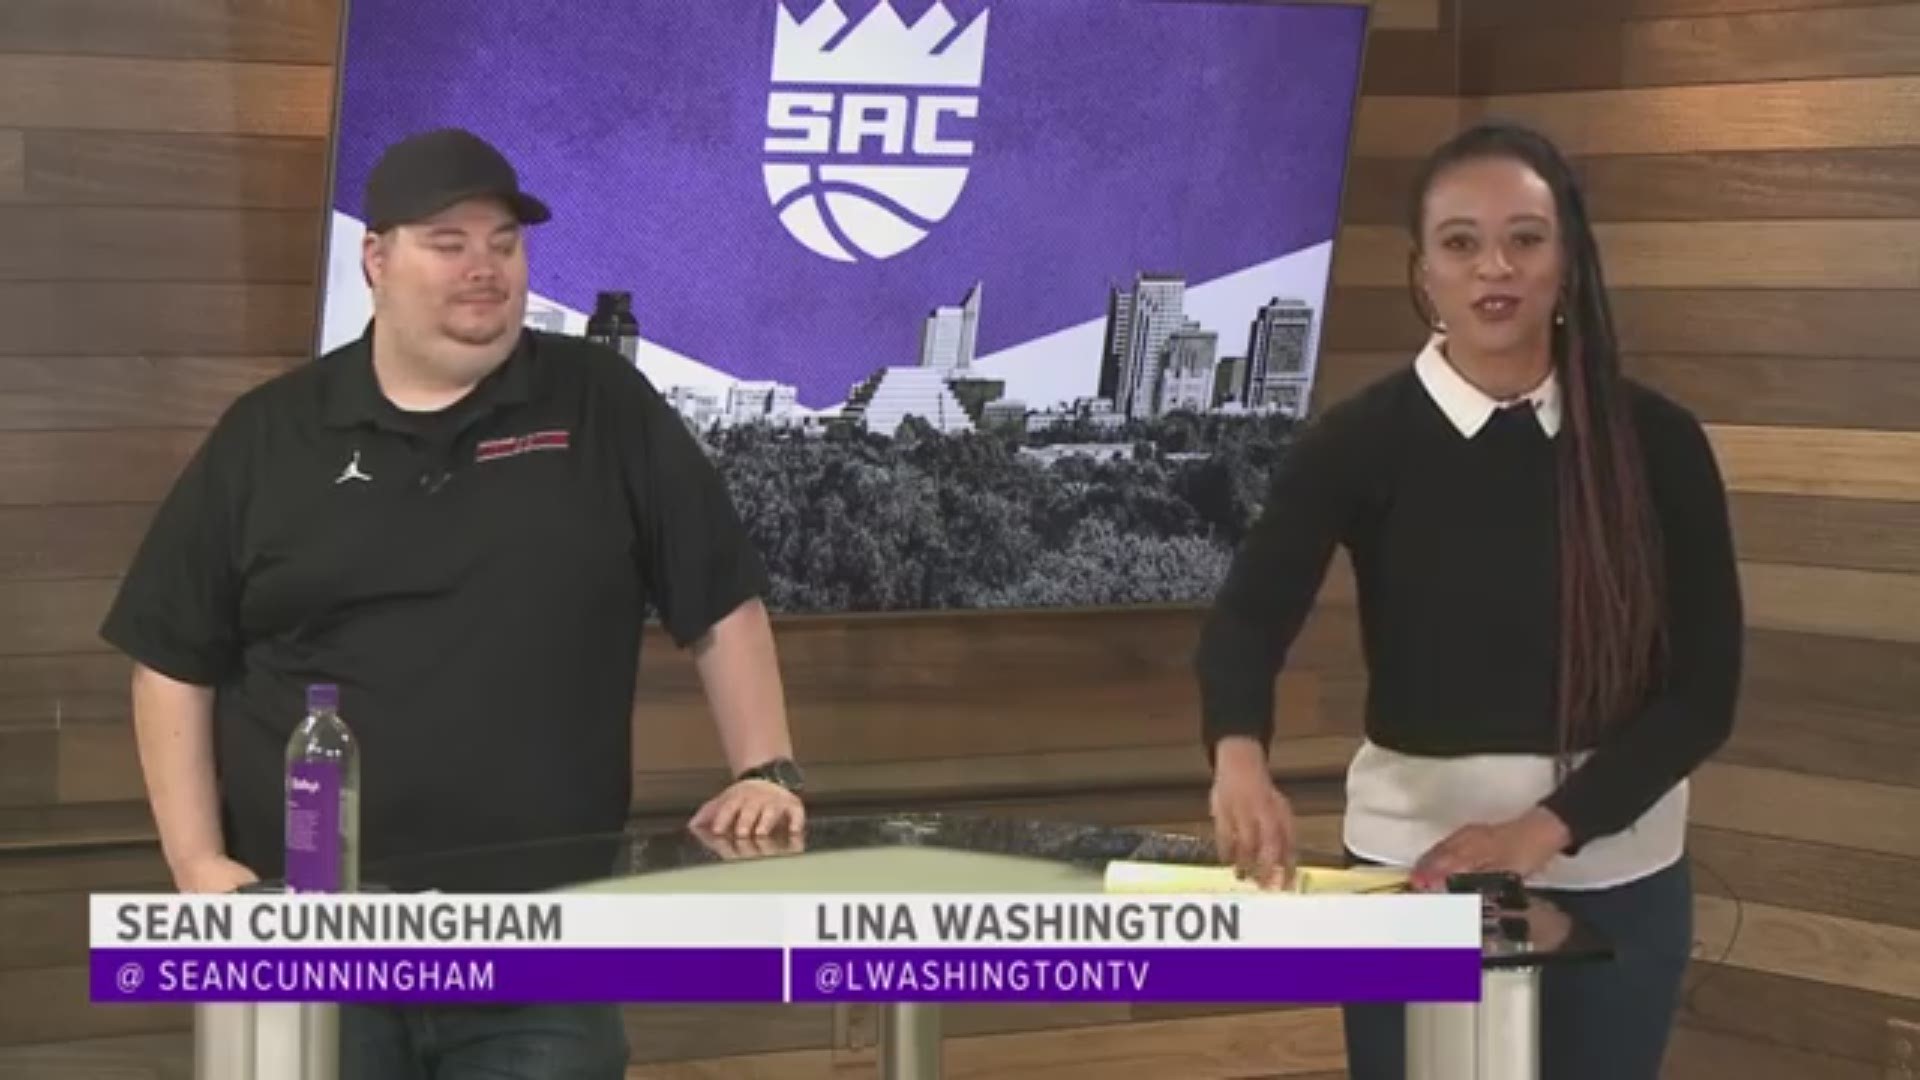 From a DeMarcus Cousins season-ending injury to Luke Walton's death stare during an awkward question. Lina Washington and Sean Cunningham discuss the latest in NBA news and NBA playoffs.